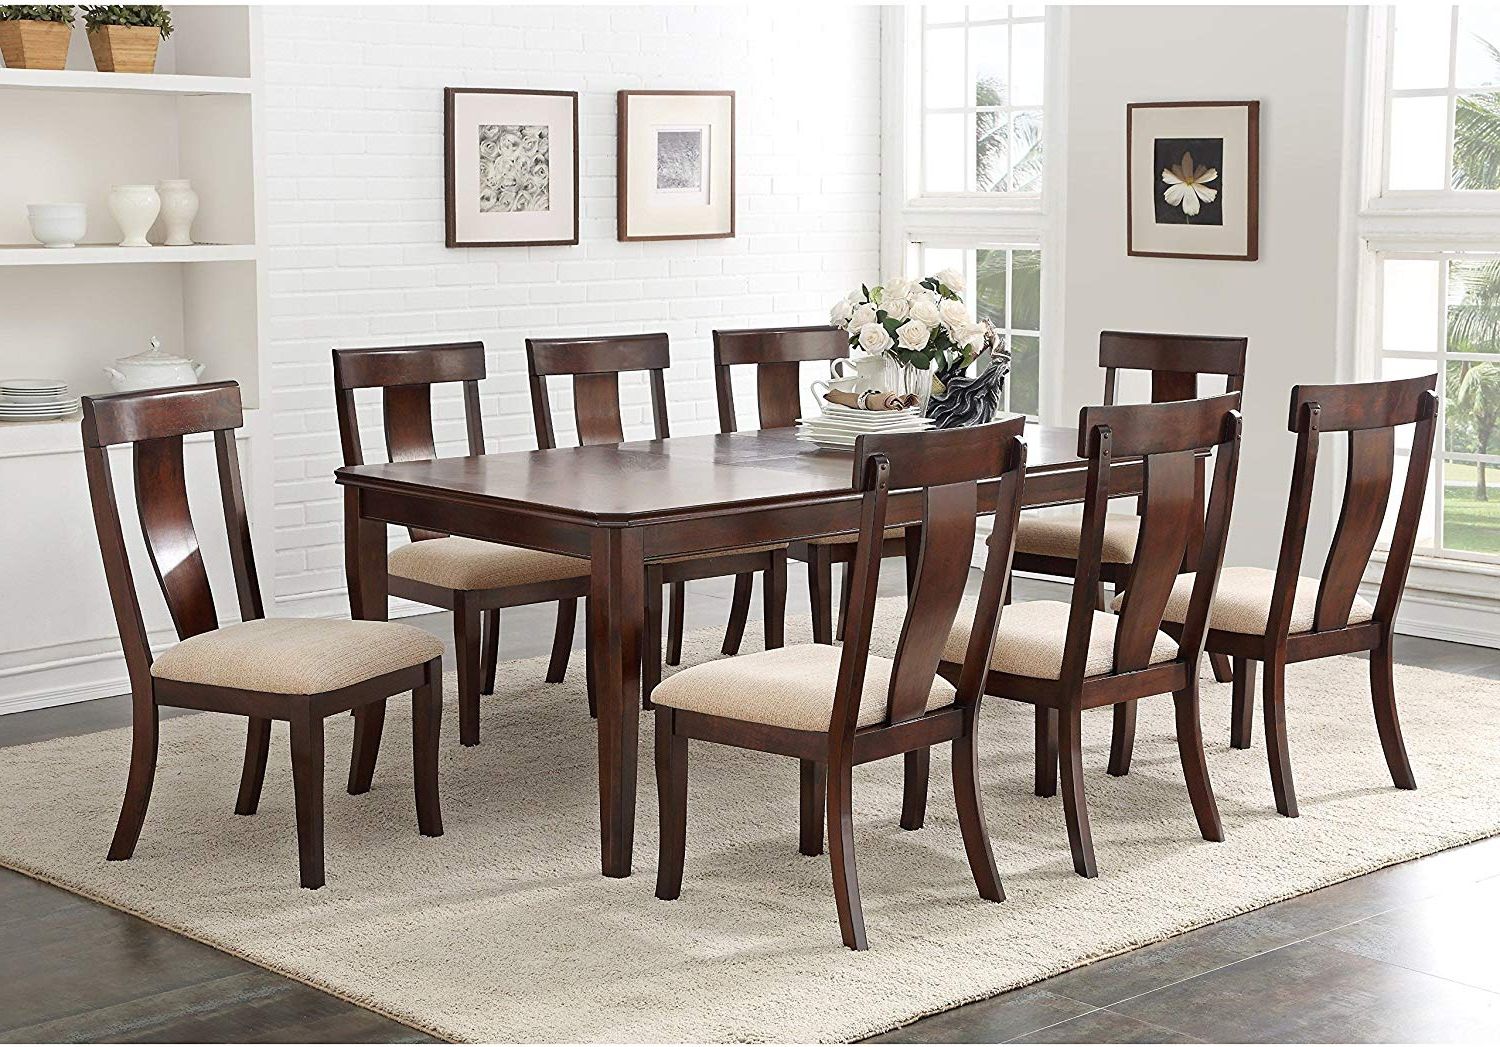 Modern Dining Room Table Set 8 Chairs